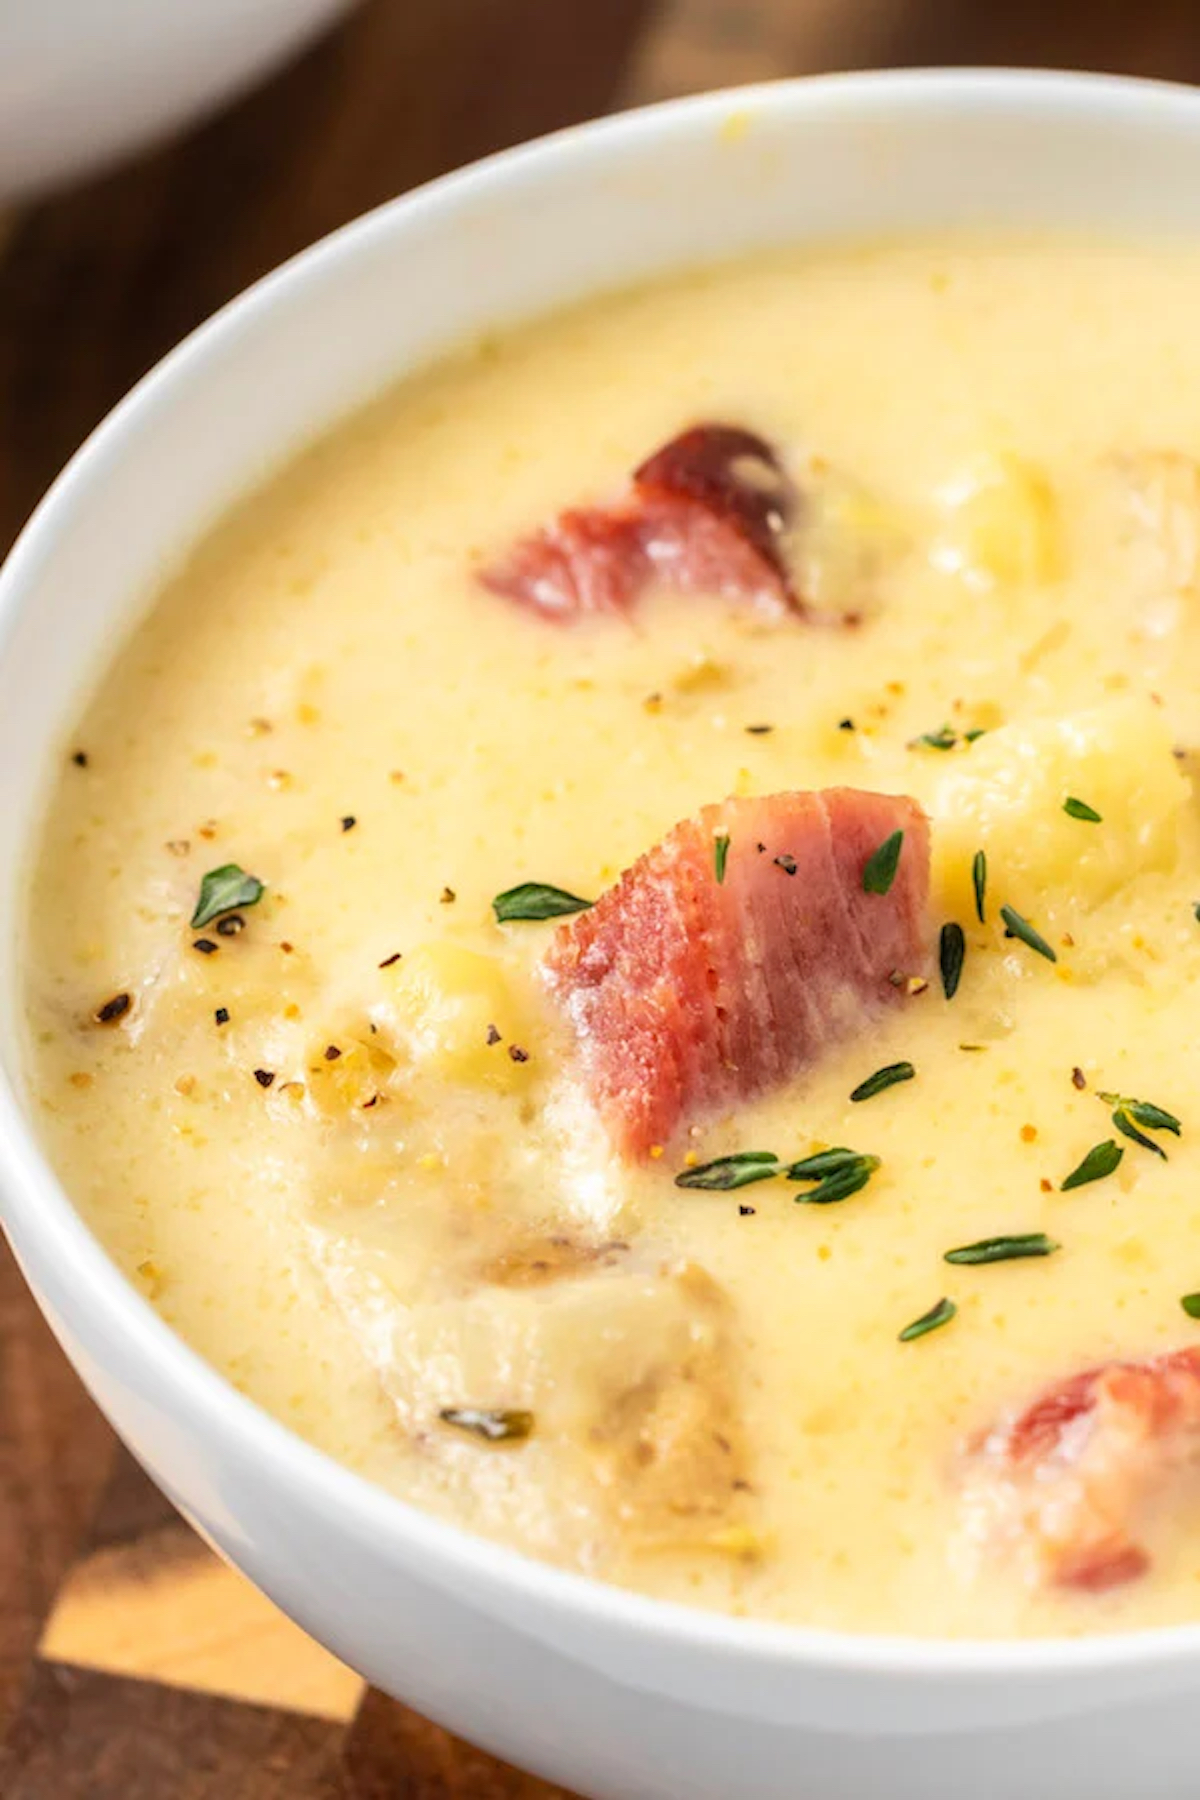 Close up of a white soup bowl filled with yellow, creamy Instant Pot soup with visible chunks of ham and potatoes.